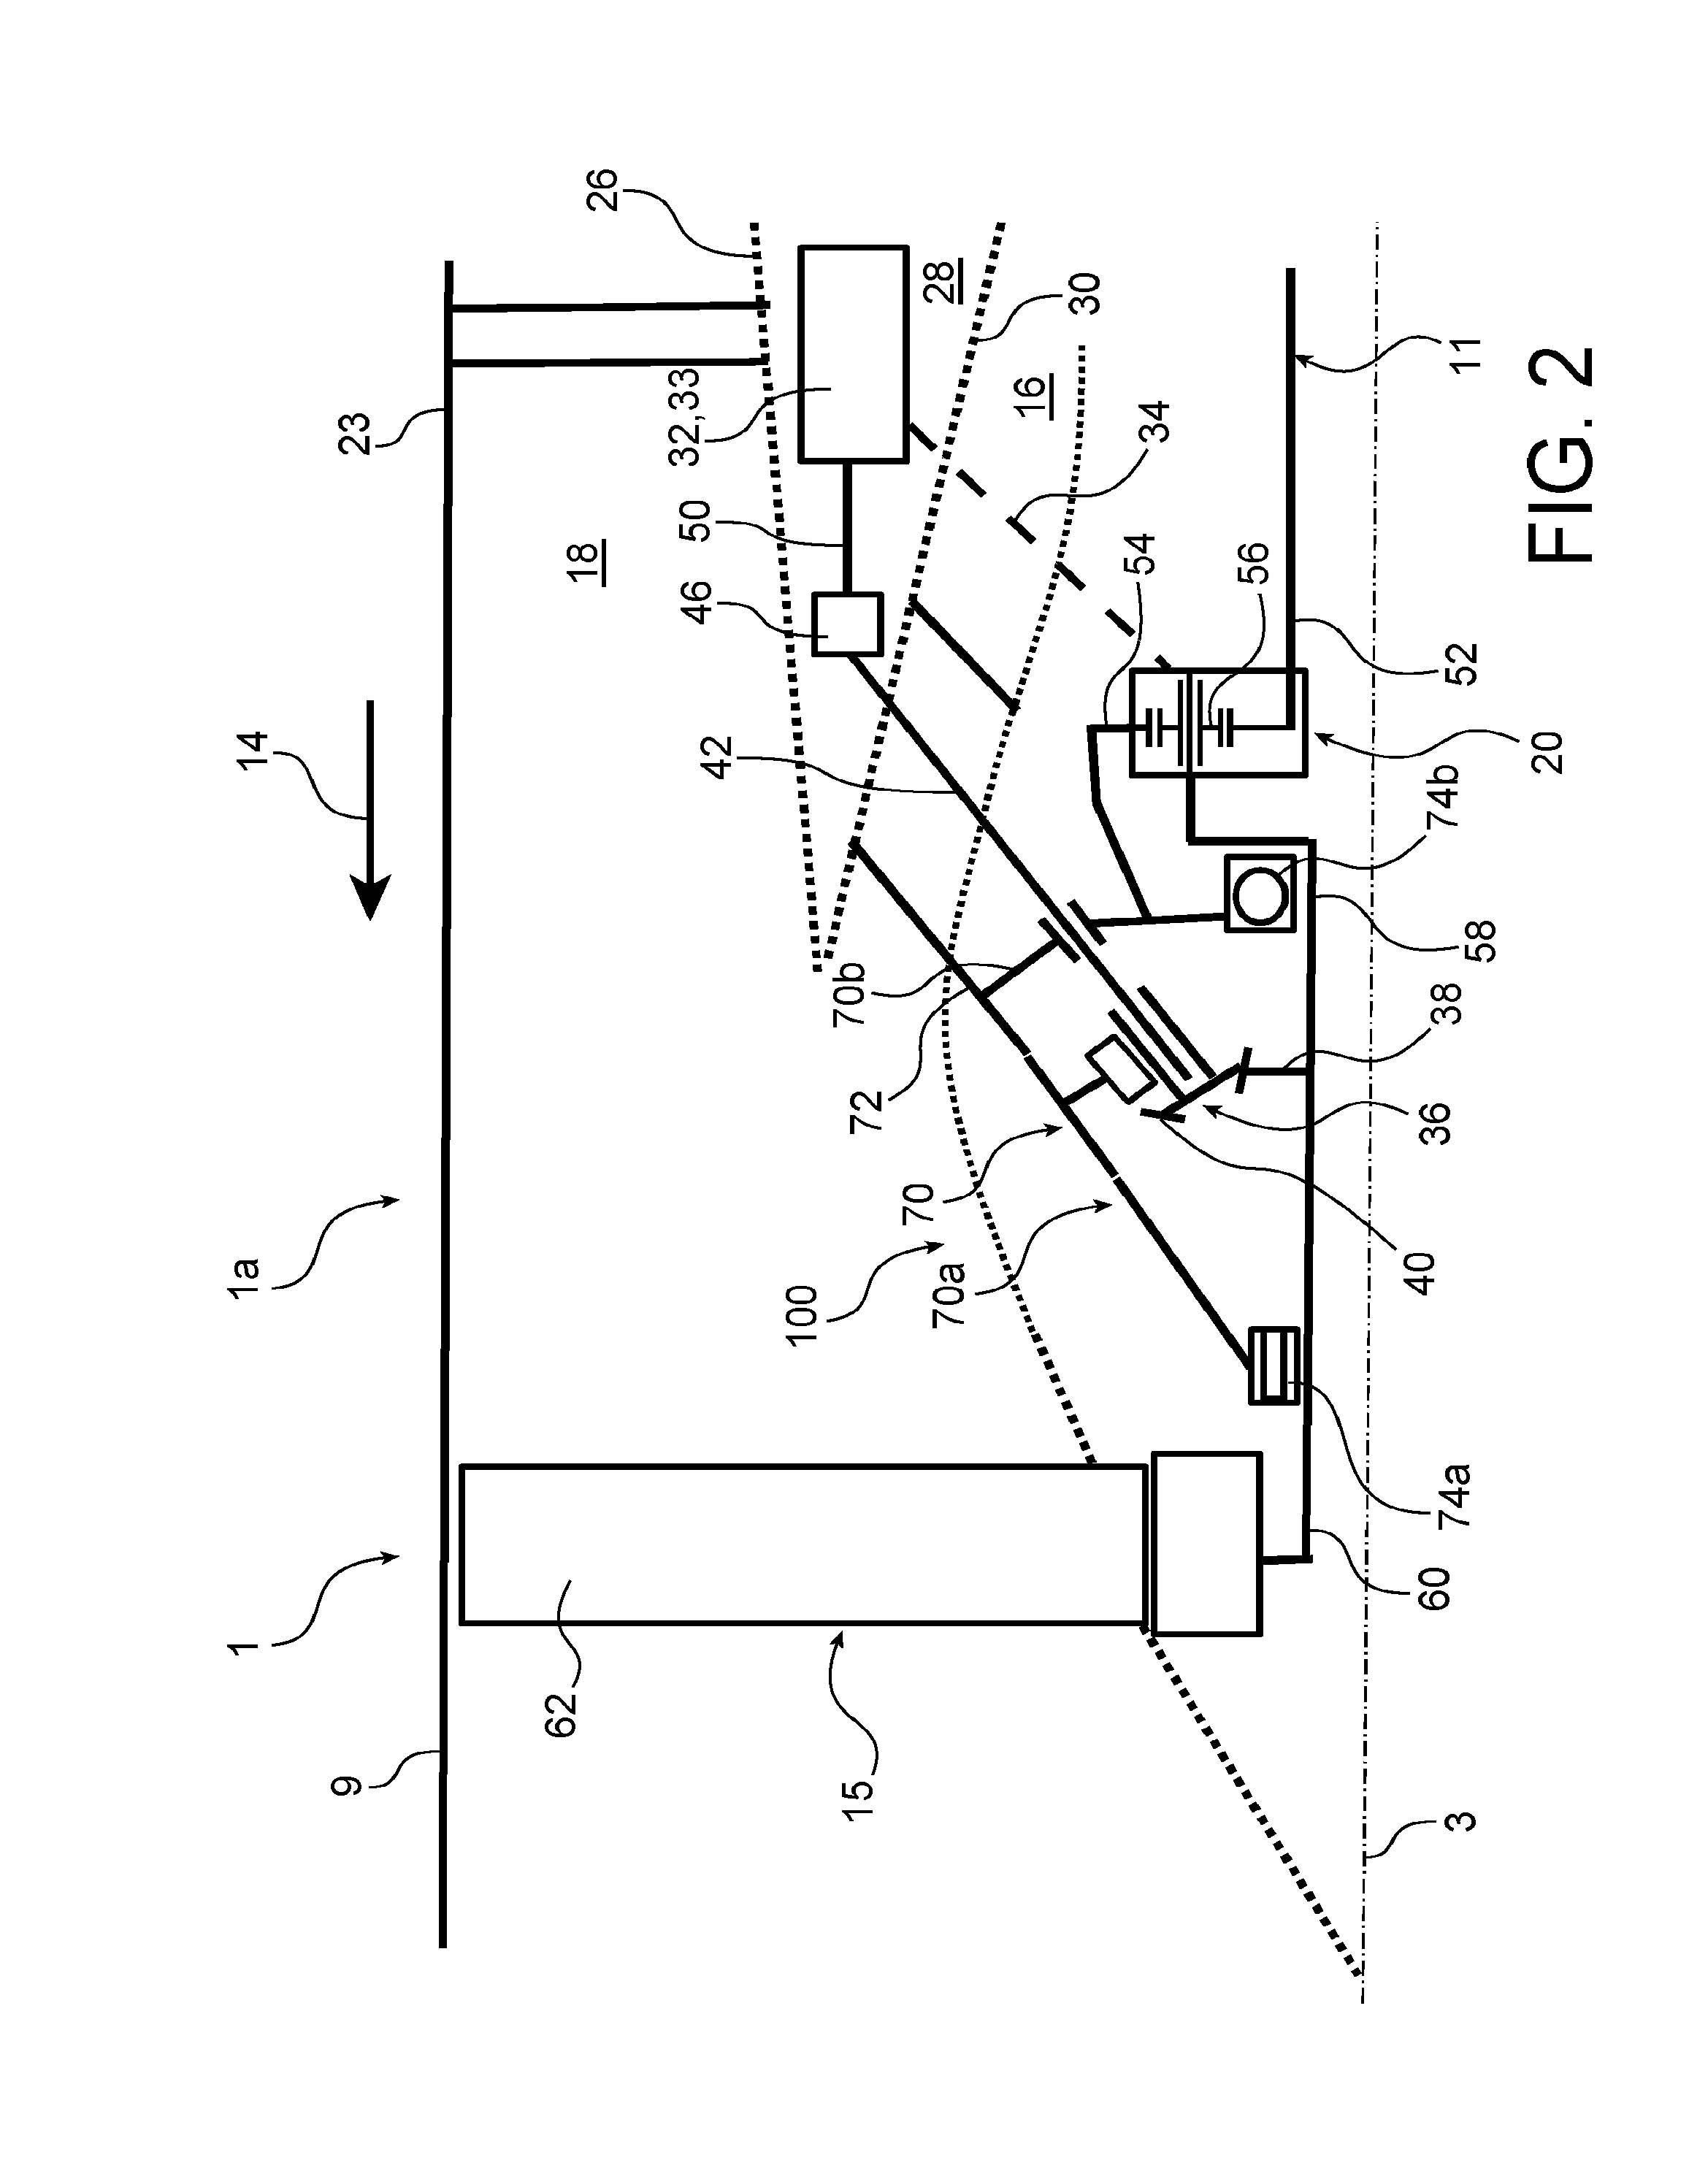 Aircraft turbine engine with improved mechanical power takeoff